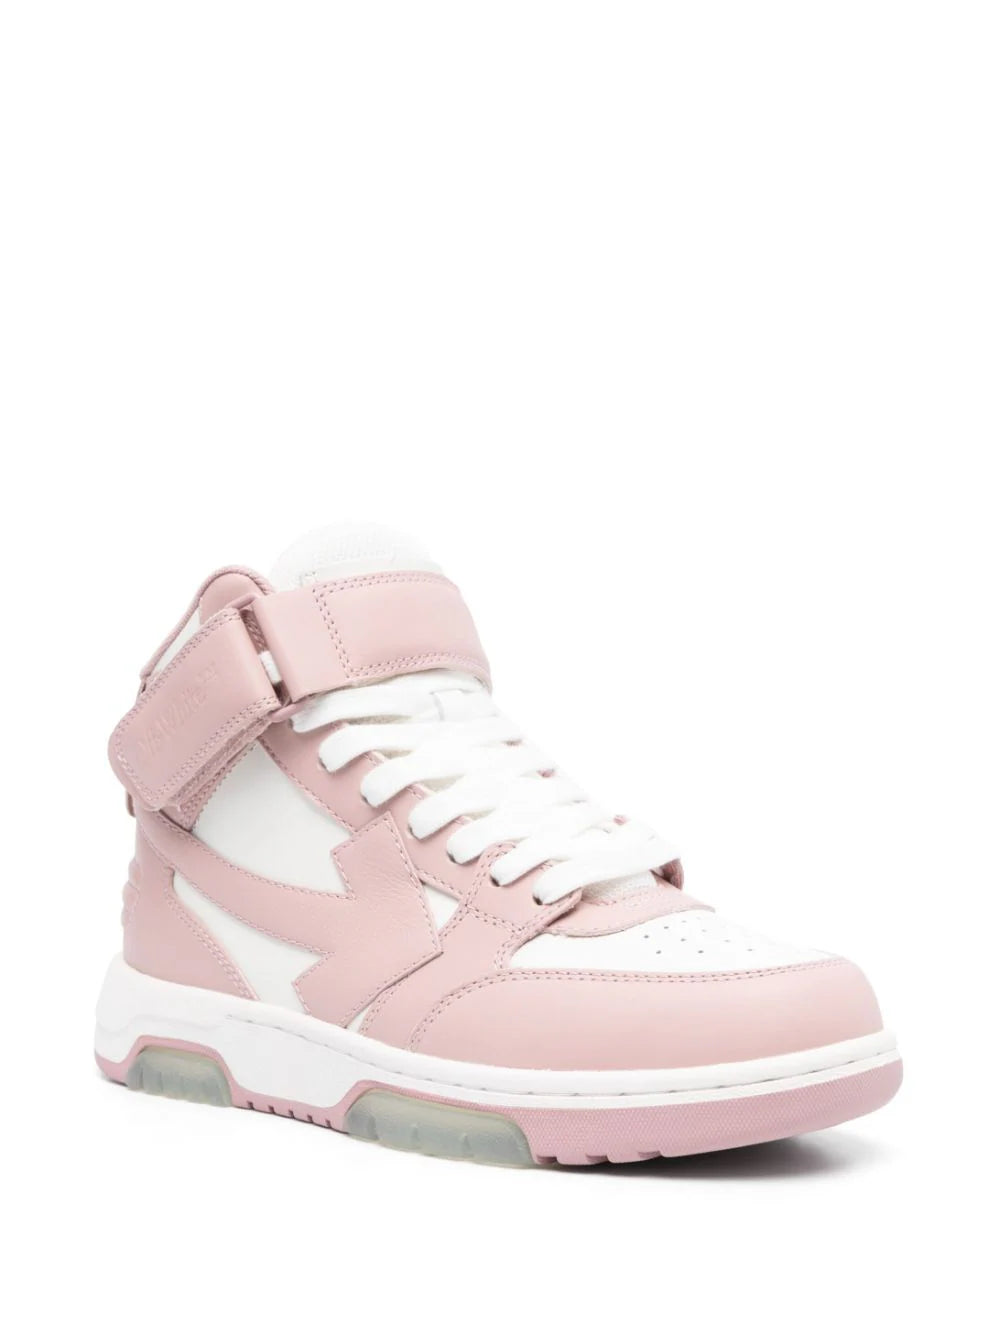 OFF-WHITE WOMEN Out Of Office Mid Top Leather Sneakers Pink/White - MAISONDEFASHION.COM